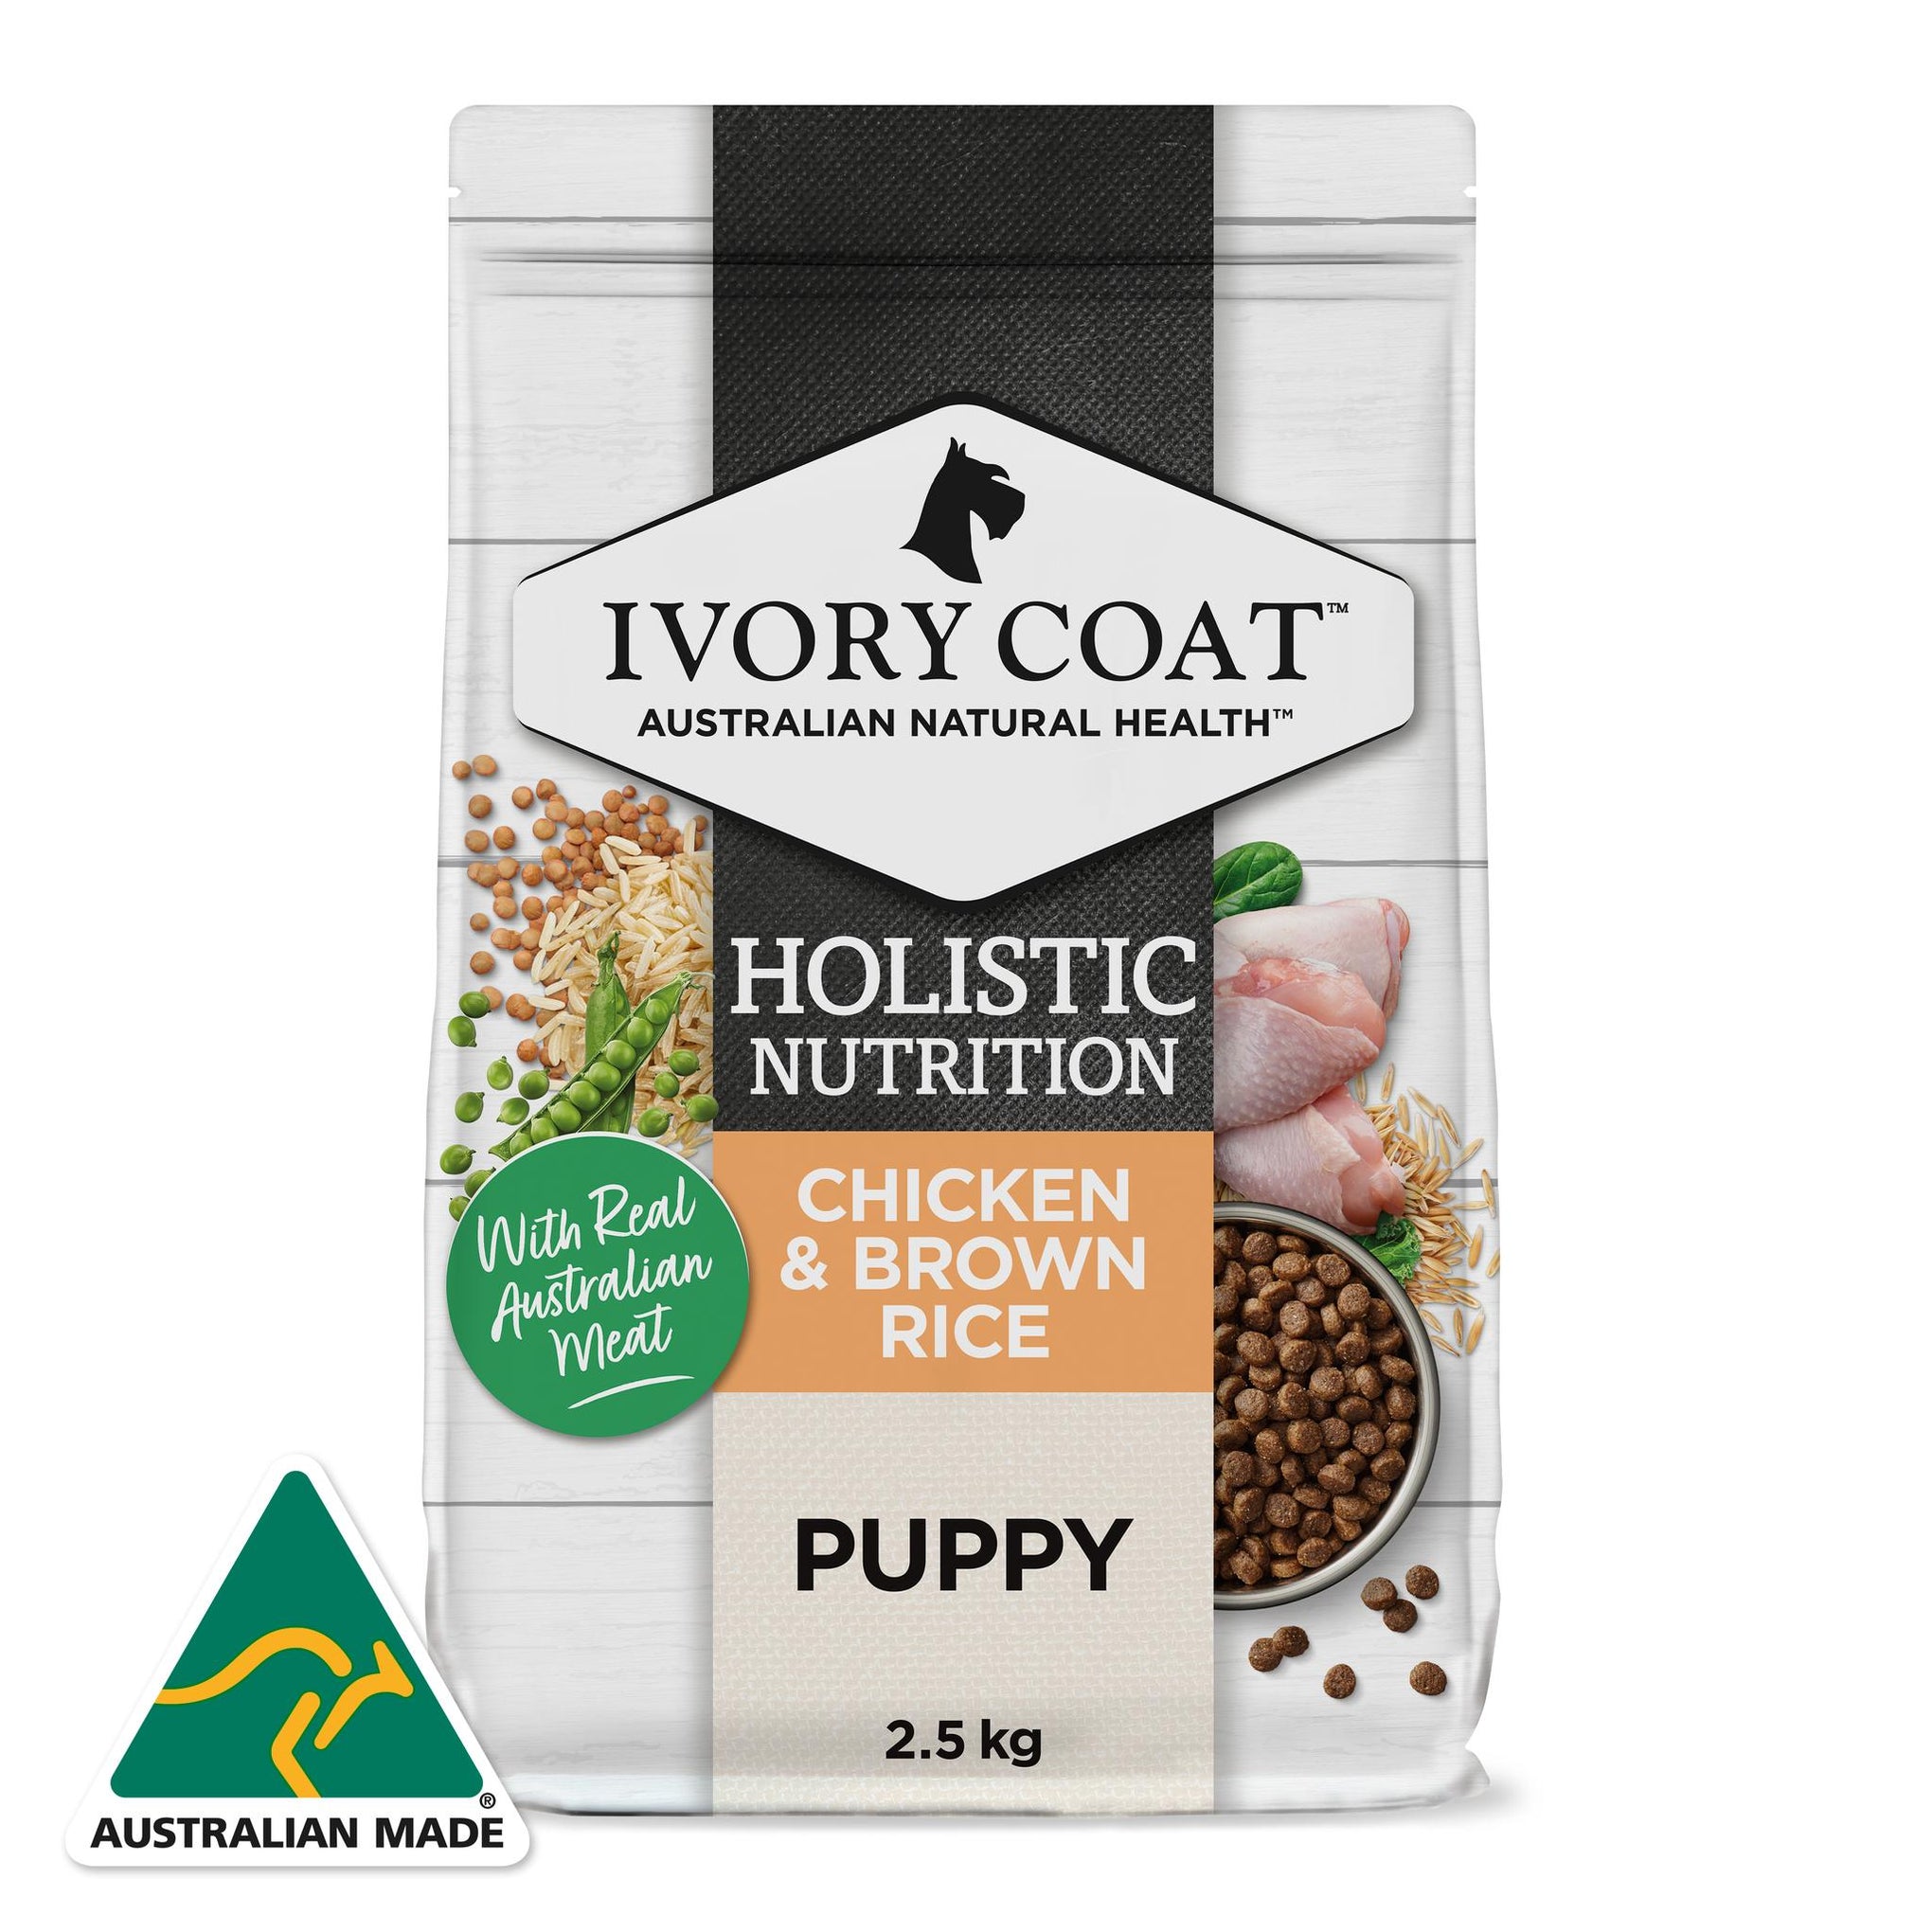 Ivory Coat Holistic Nutrition Puppy Chicken & Brown Rice Dry Dog Food